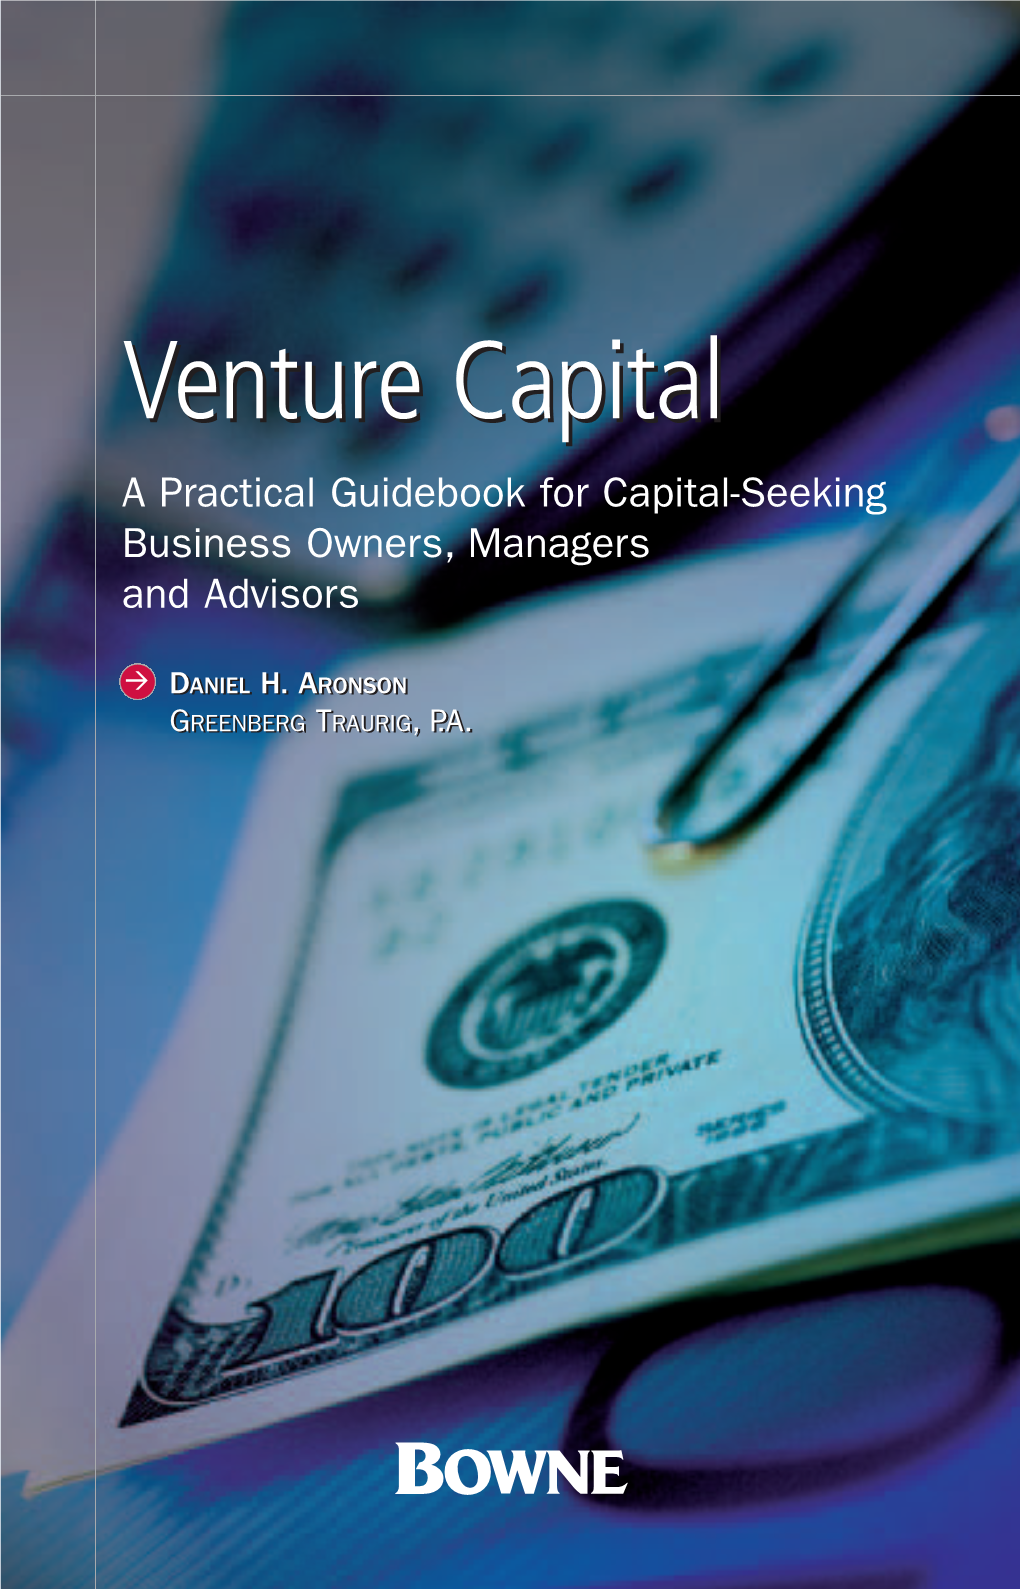 Venture Capitalcapital a Practical Guidebook for Capital-Seeking Business Owners, Managers and Advisors